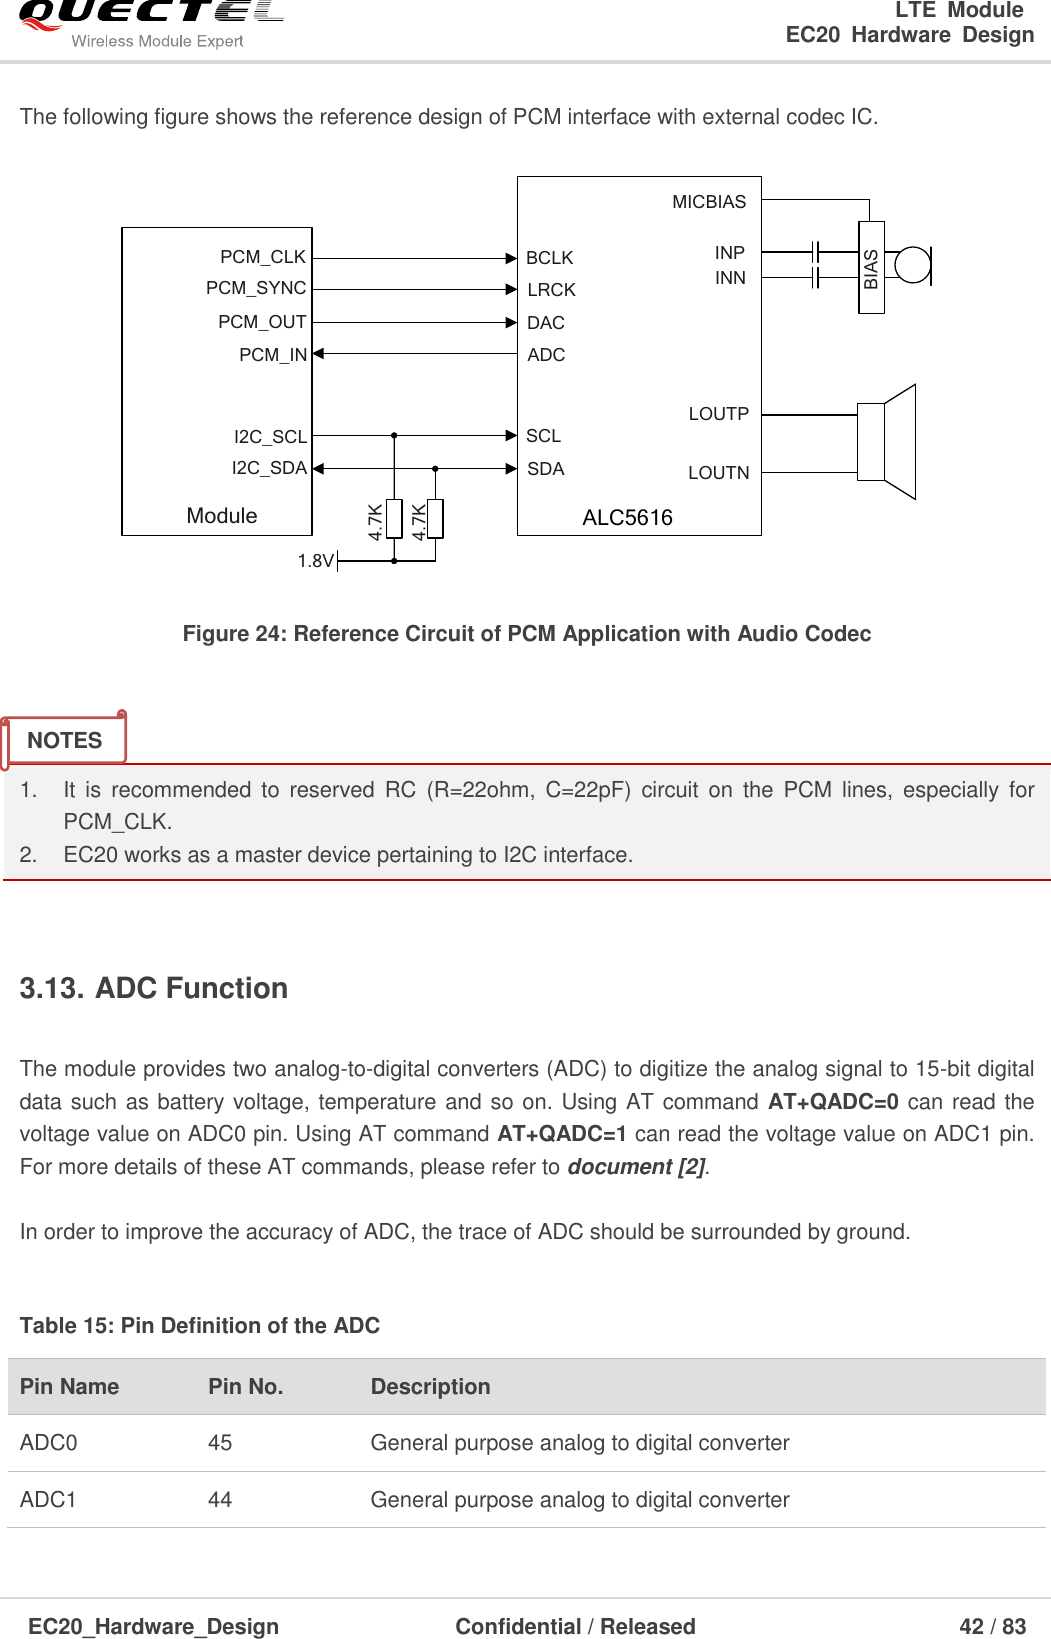                                                                        LTE  Module                                                                   EC20  Hardware  Design  EC20_Hardware_Design                  Confidential / Released                            42 / 83     The following figure shows the reference design of PCM interface with external codec IC.  PCM_INPCM_OUTPCM_SYNCPCM_CLKI2C_SCLI2C_SDAModule1.8V4.7K4.7KBCLKLRCKDACADCSCLSDABIASMICBIASINPINNLOUTPLOUTNALC5616 Figure 24: Reference Circuit of PCM Application with Audio Codec   1.    It  is  recommended  to  reserved  RC  (R=22ohm,  C=22pF)  circuit  on  the  PCM  lines,  especially  for   PCM_CLK. 2.    EC20 works as a master device pertaining to I2C interface.  3.13. ADC Function  The module provides two analog-to-digital converters (ADC) to digitize the analog signal to 15-bit digital data such as battery voltage, temperature and so on. Using AT command AT+QADC=0 can read the voltage value on ADC0 pin. Using AT command AT+QADC=1 can read the voltage value on ADC1 pin. For more details of these AT commands, please refer to document [2].  In order to improve the accuracy of ADC, the trace of ADC should be surrounded by ground.    Table 15: Pin Definition of the ADC   Pin Name Pin No. Description ADC0 45 General purpose analog to digital converter ADC1 44 General purpose analog to digital converter NOTES 